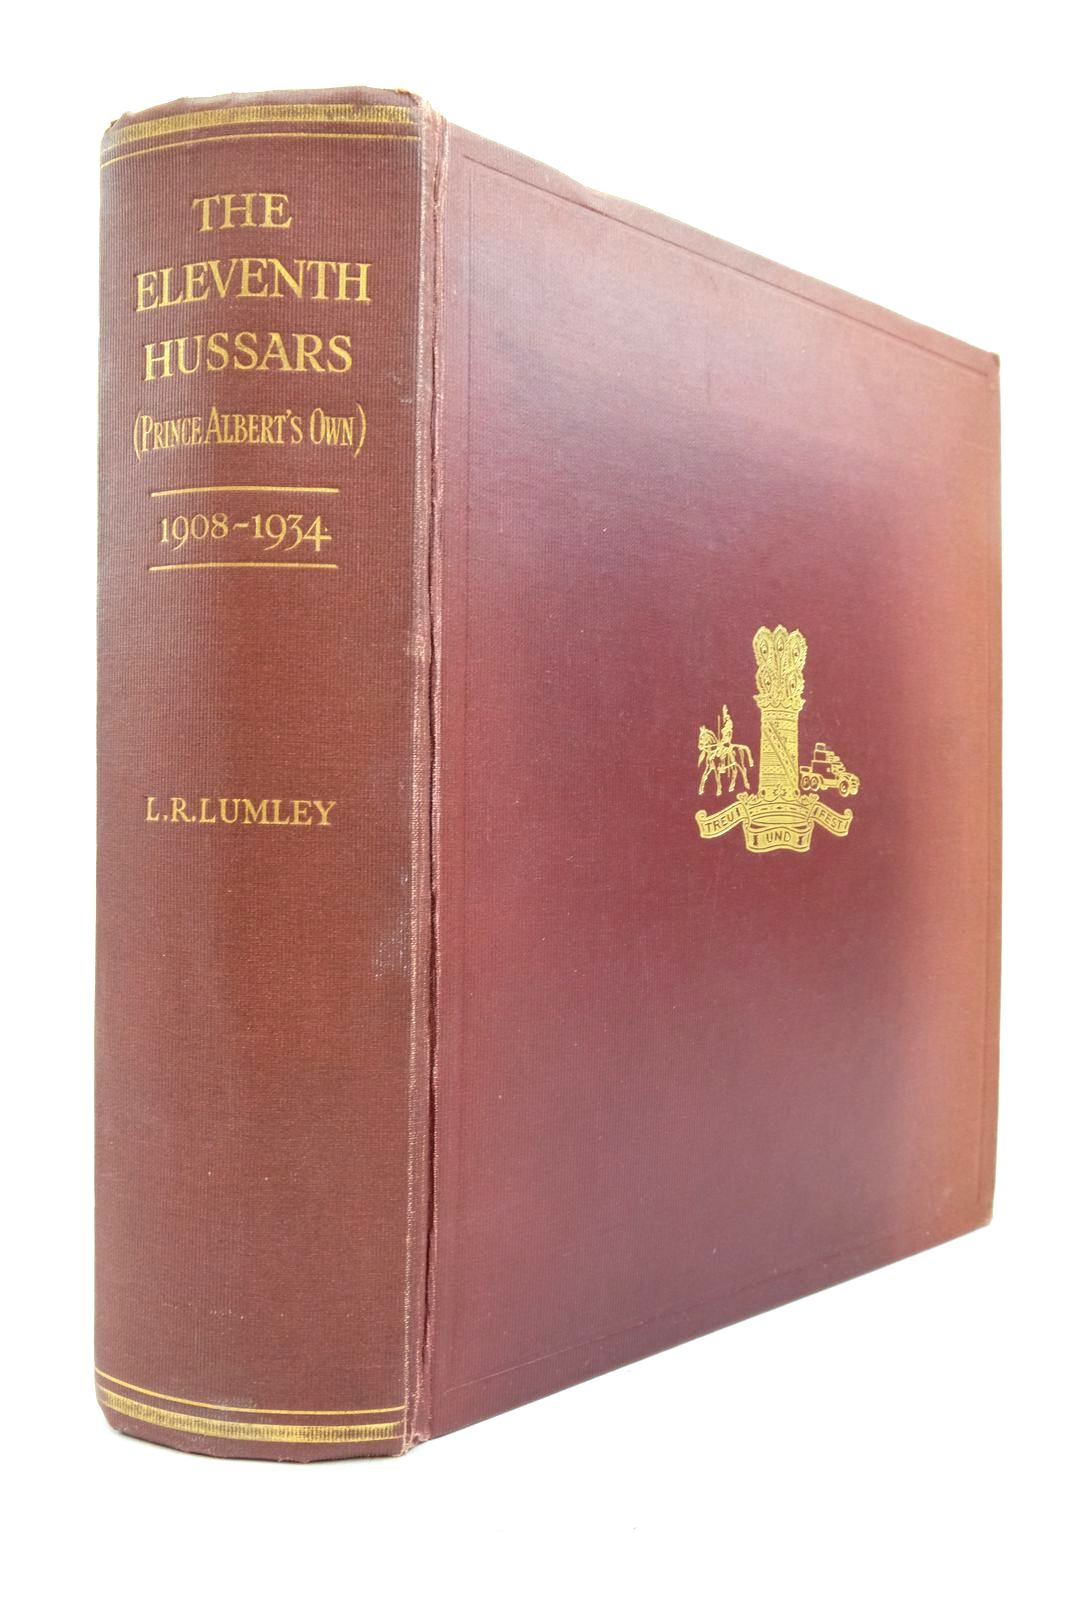 Photo of HISTORY OF THE ELEVENTH HUSSARS (PRINCE ALBERT'S OWN) 1908-1934- Stock Number: 2137736